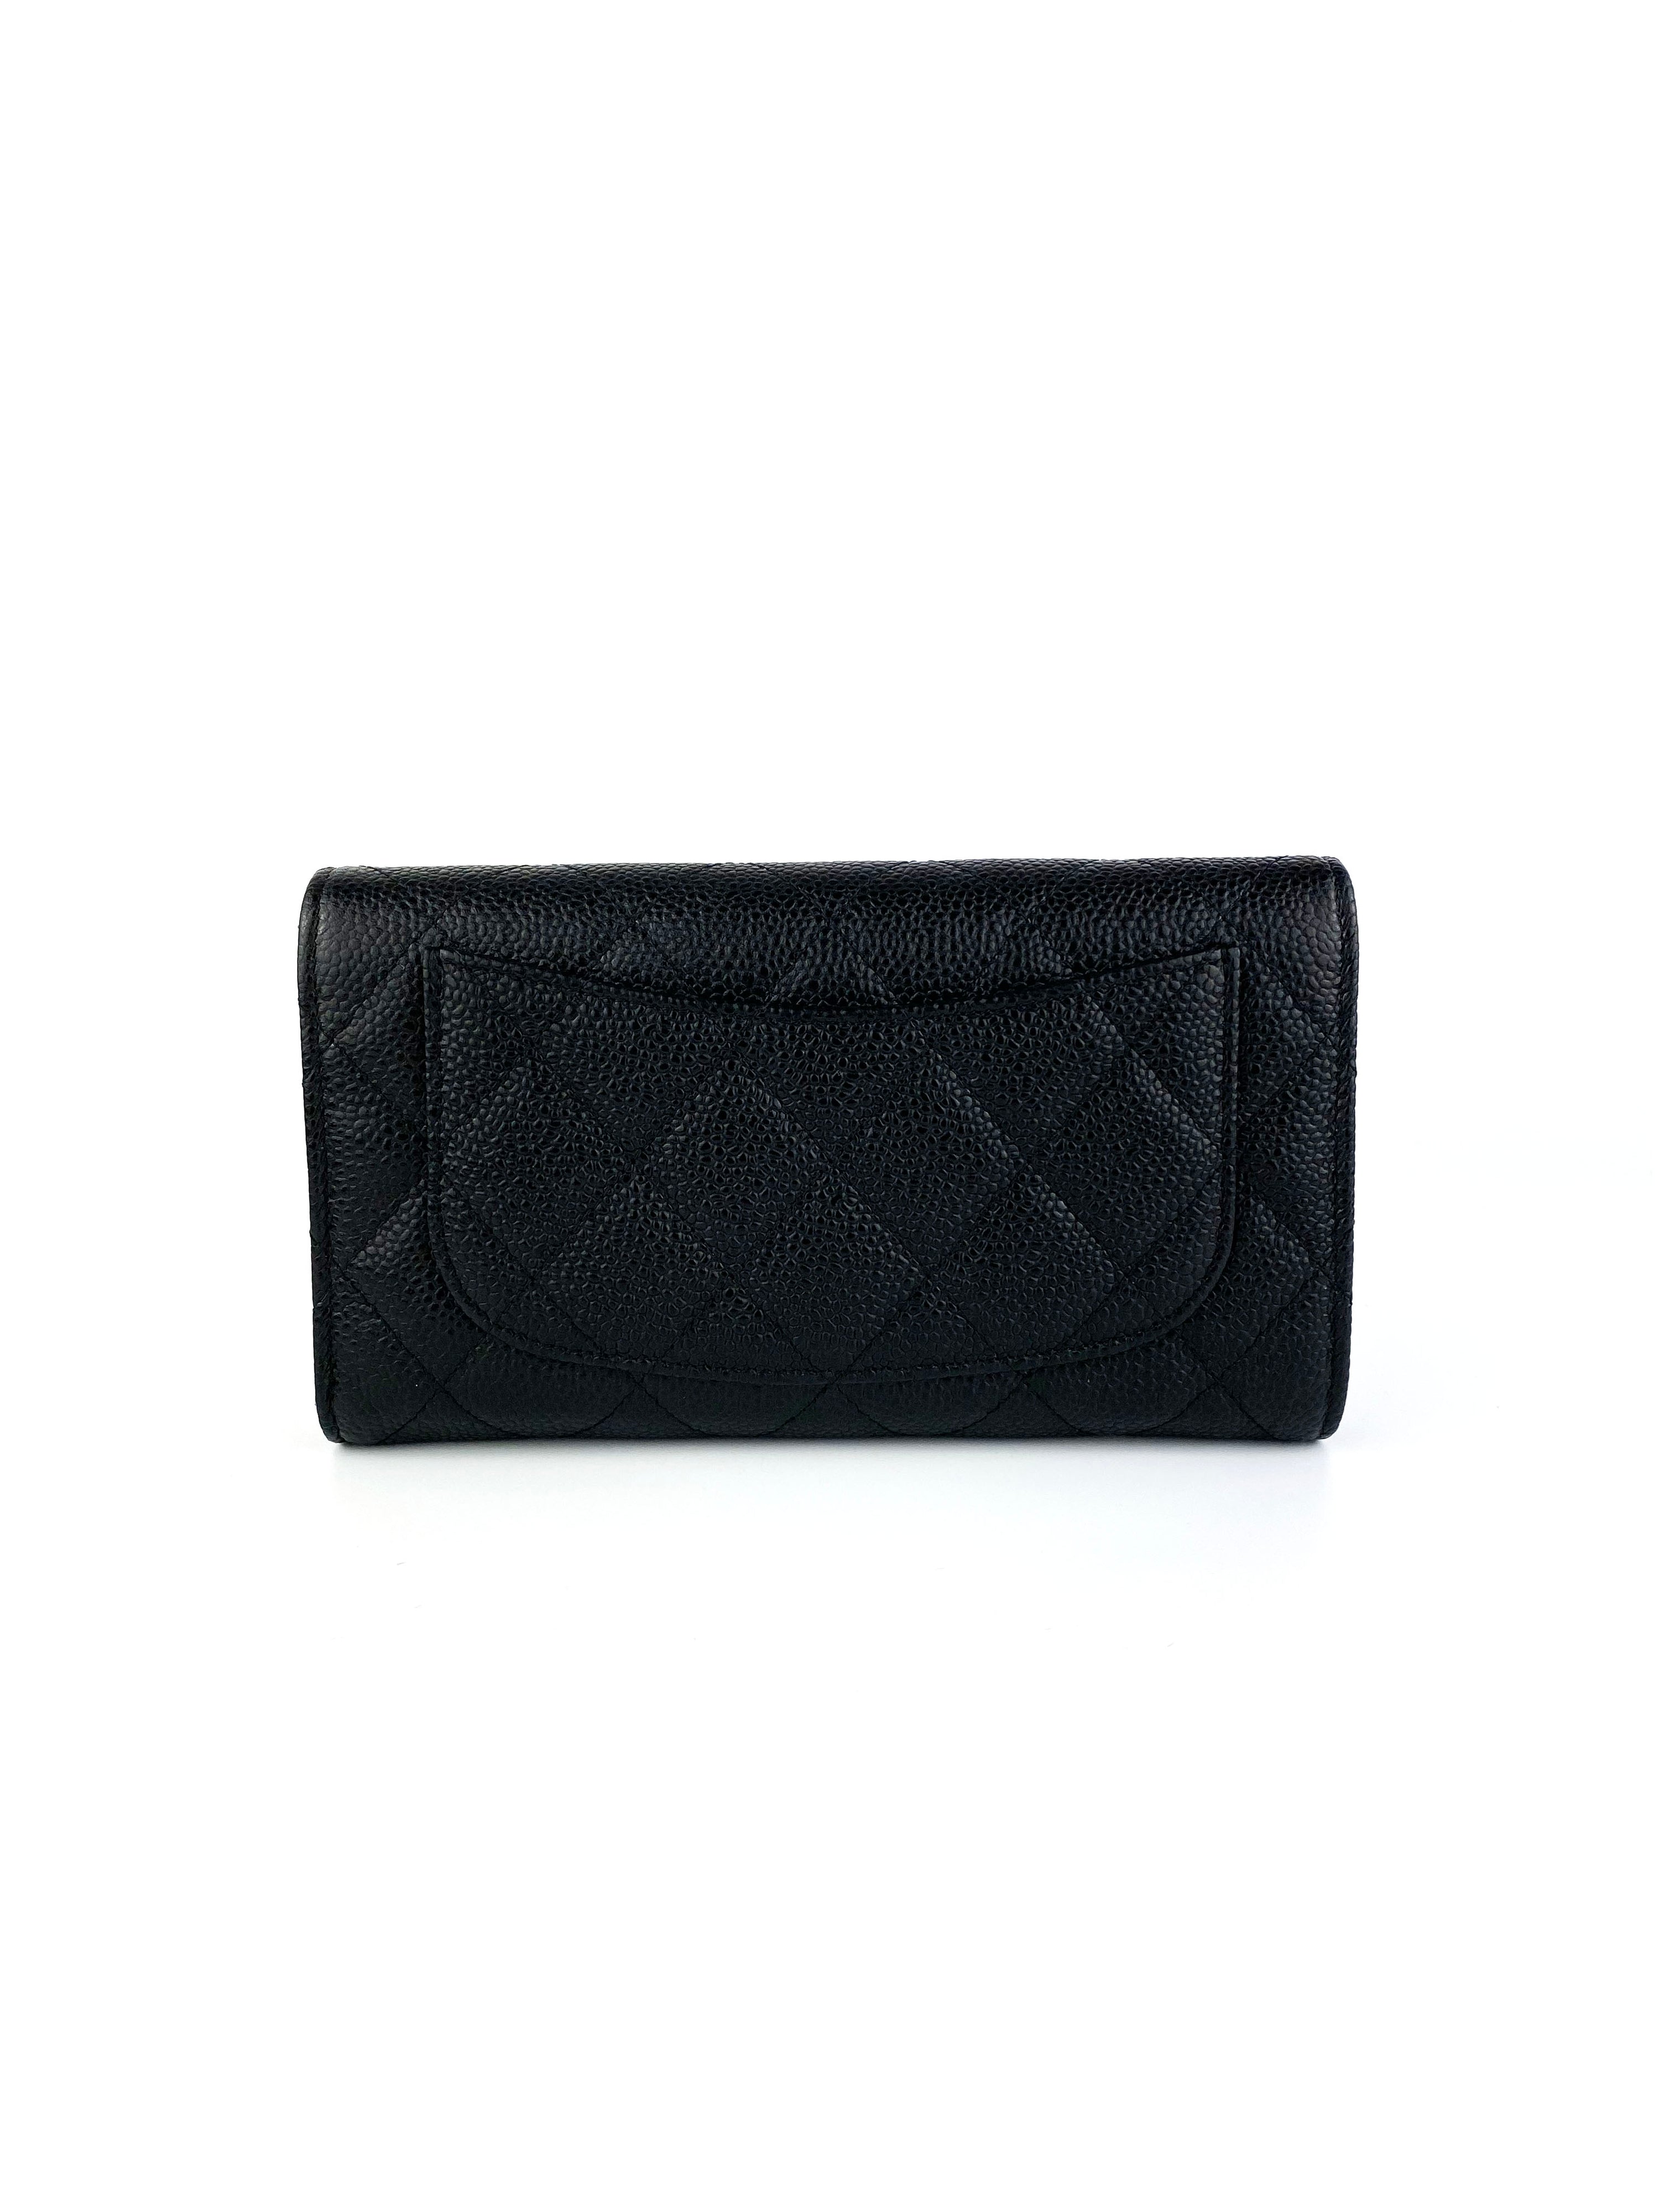 Chanel Black Caviar Quilted Wallet